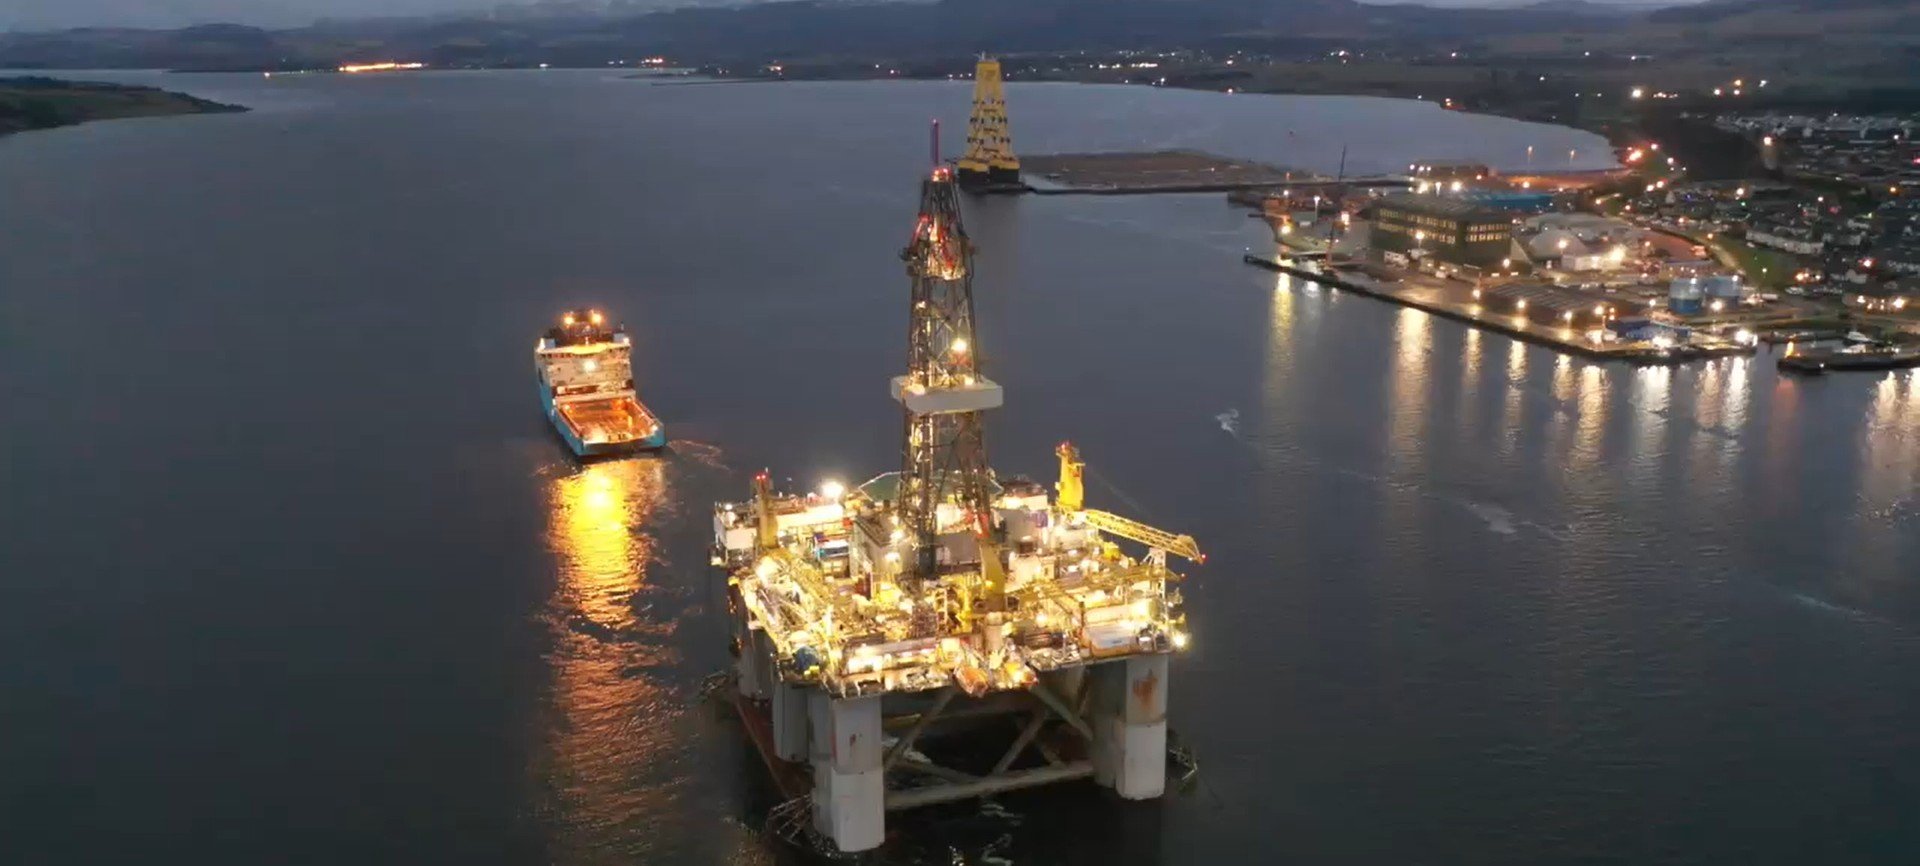 WATCH: Semi-sub rig arrives at UK port to get ready for its inaugural decom gig in North Sea